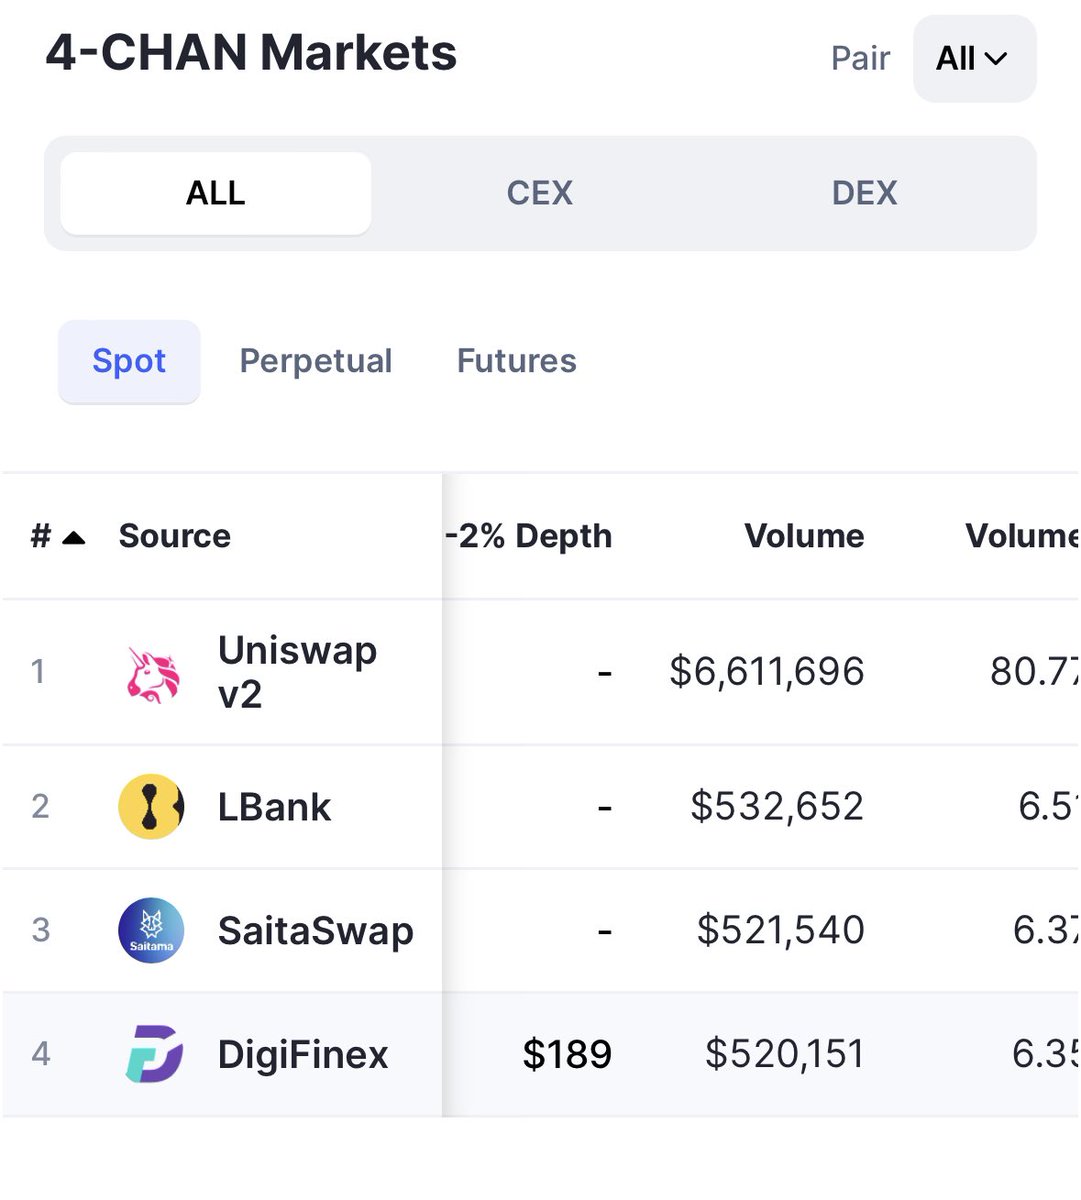 Love seeing #SaitaSwap giving #4CHAN a newly listed project on each of these exchanges listed below comparable volume.

This shows the potential because we all as #Saitama holders know that the swap and #SaitaPro will become much much larger.

Very exciting! @wearesaitama